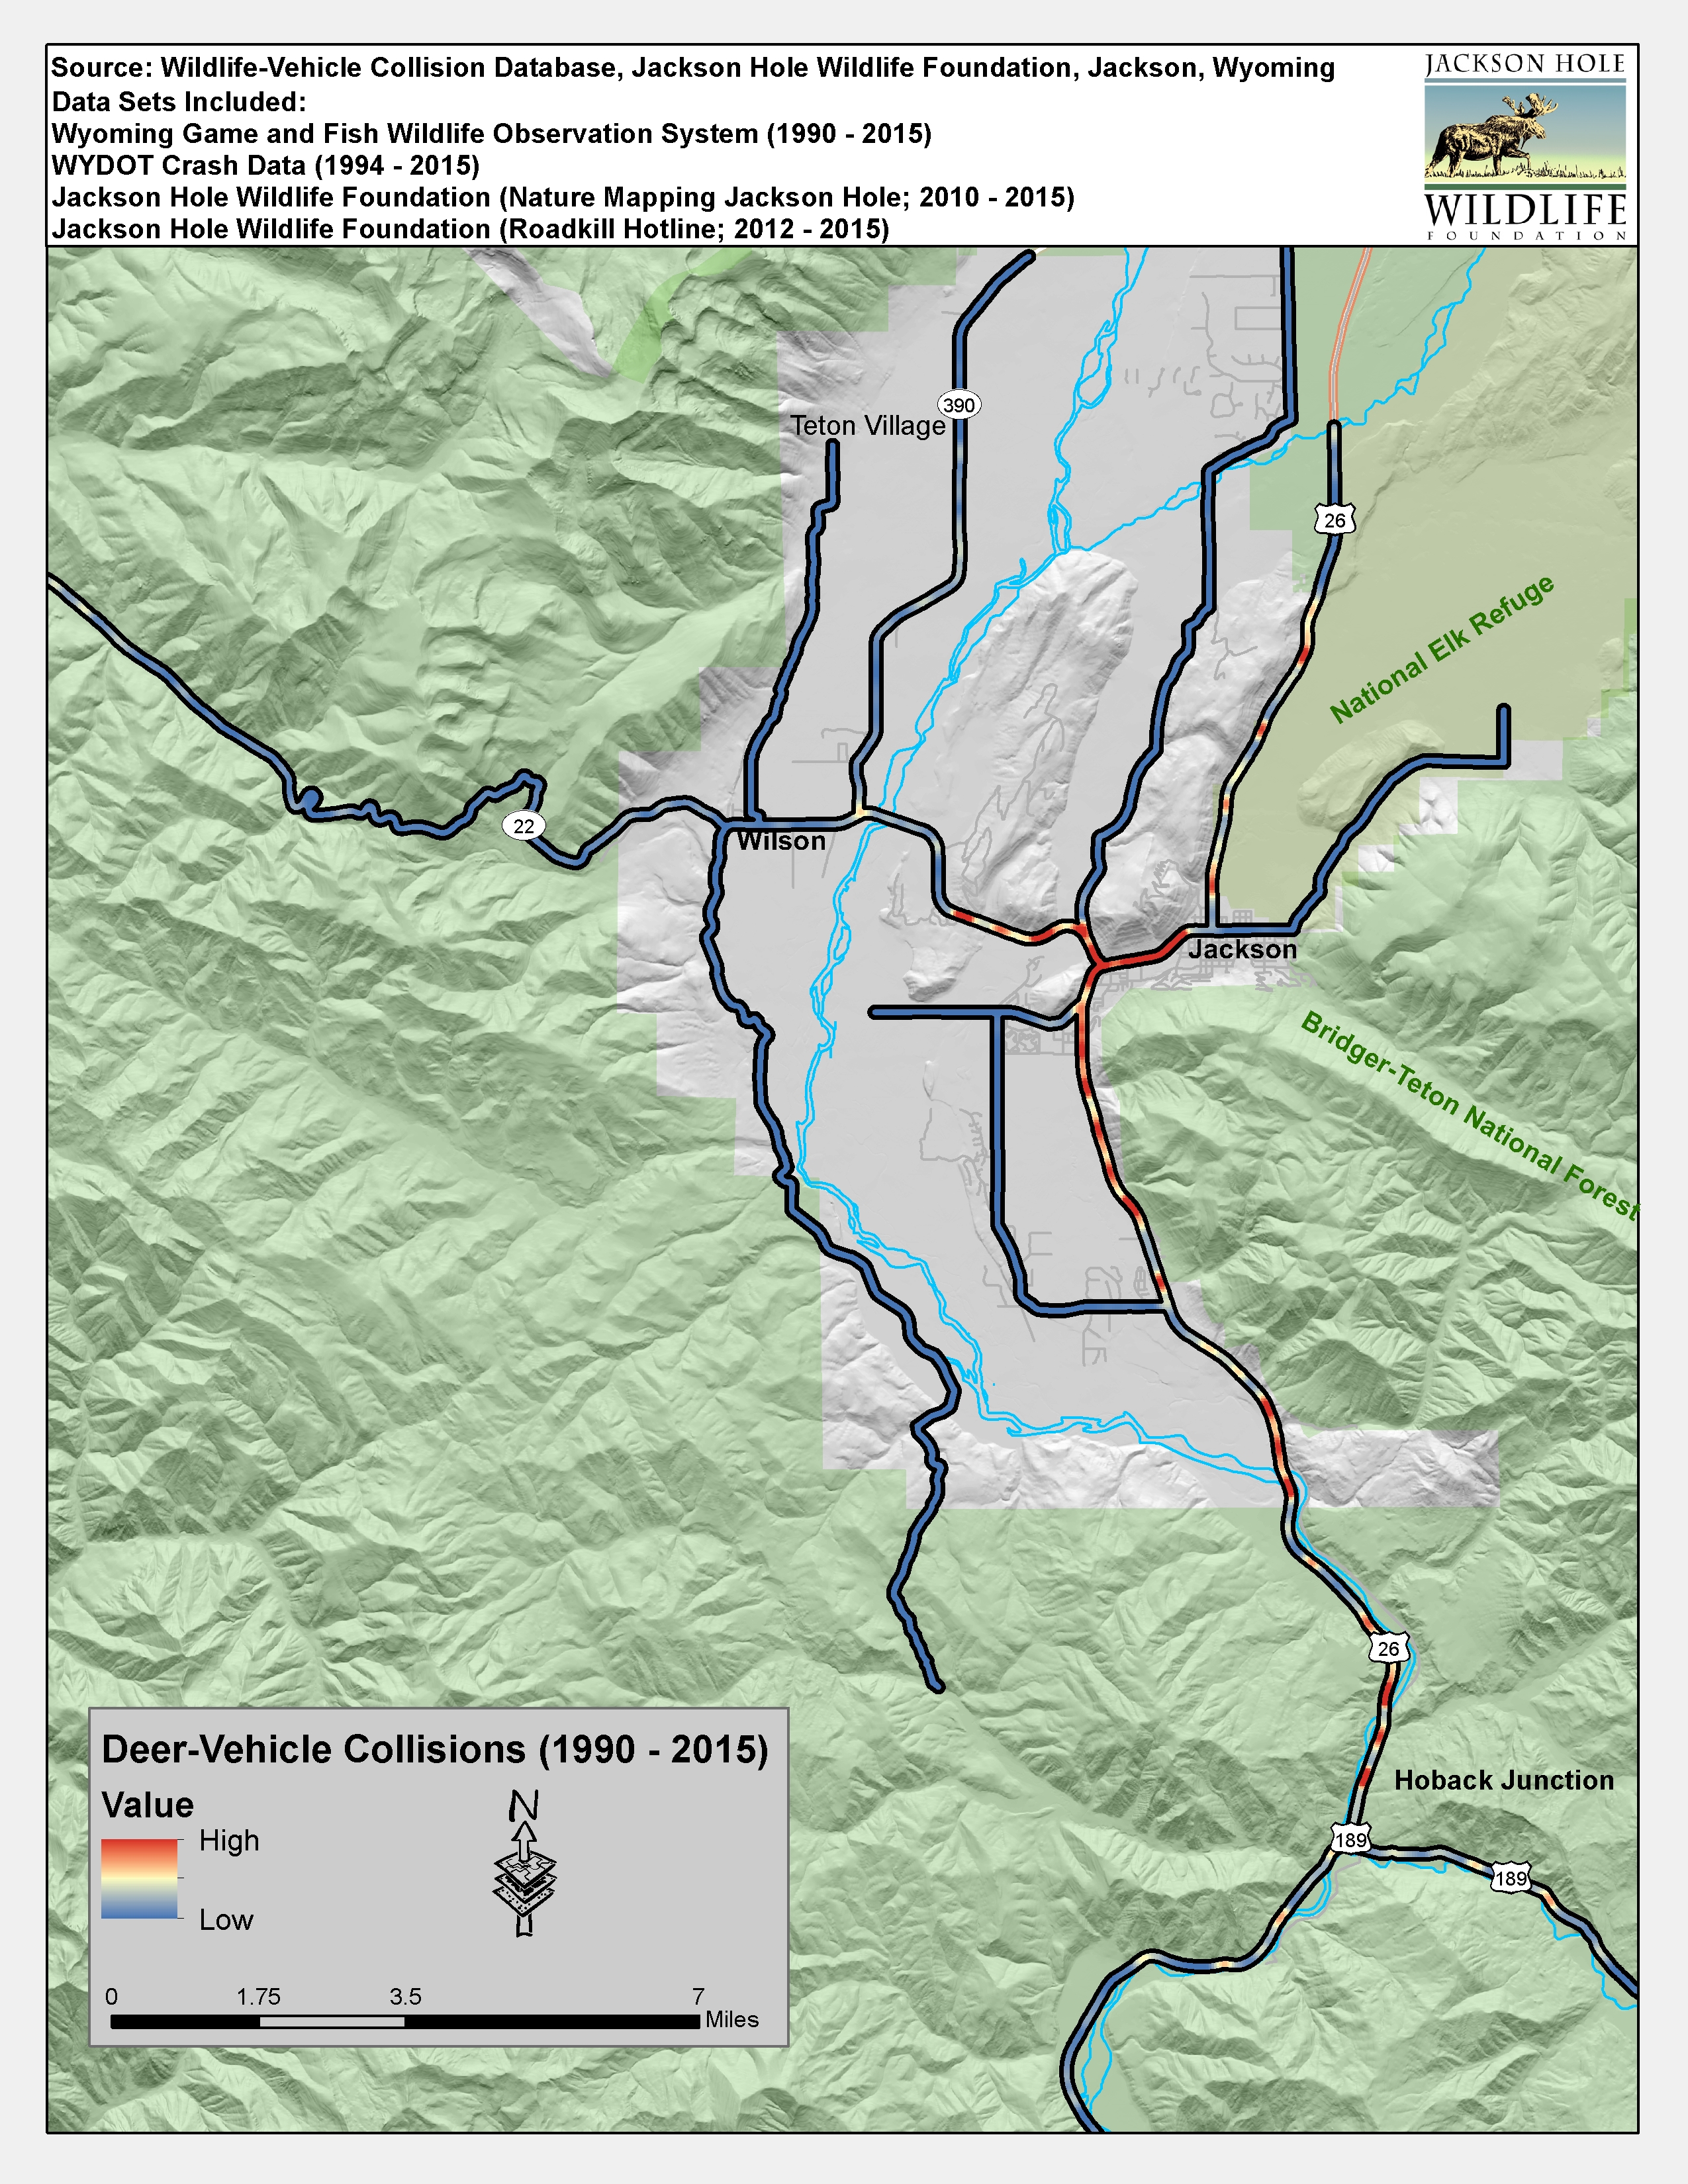 Wildlife-Vehicle Collisions for Teton County 1990-2015 All Species